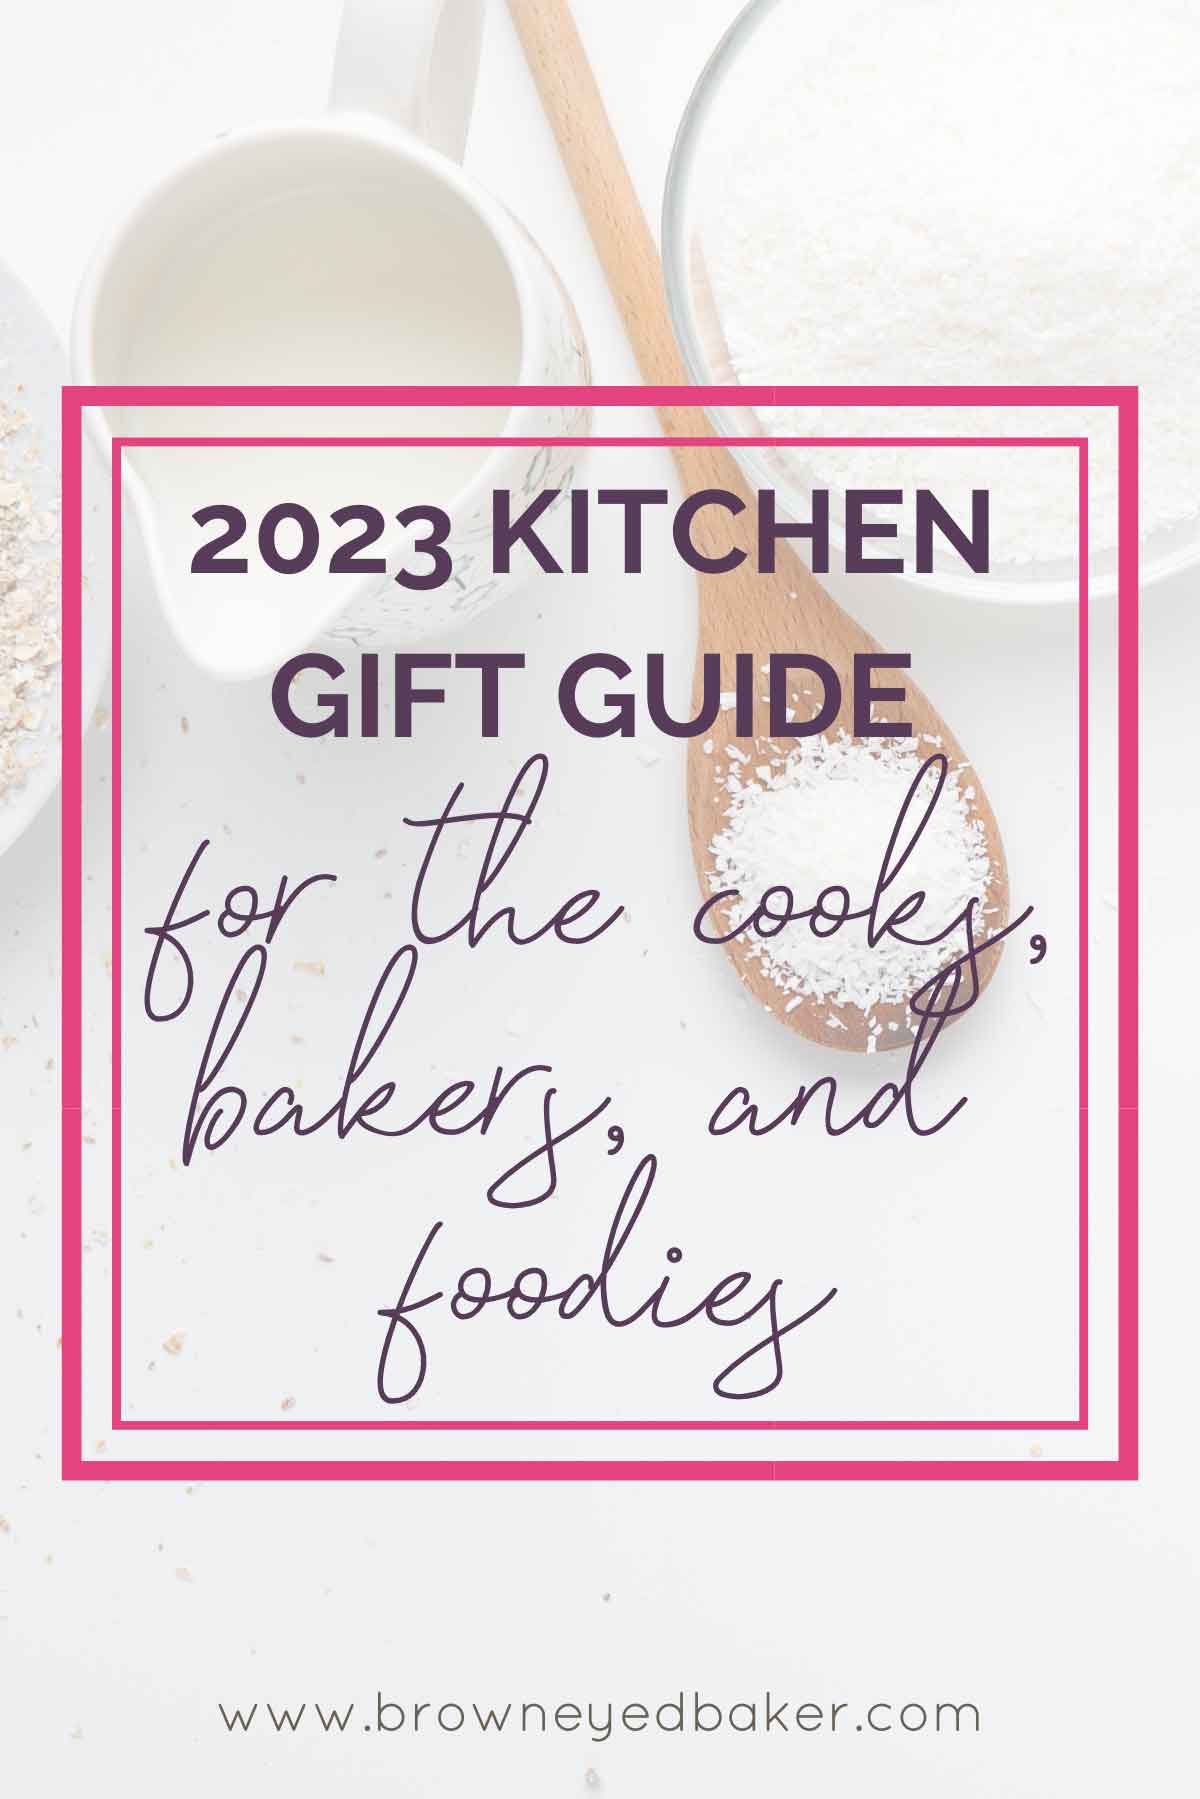 Cooking tools in background with text overlay on top saying 2023 Kitchen Gift Guide for the cooks, bakers, and foodies.